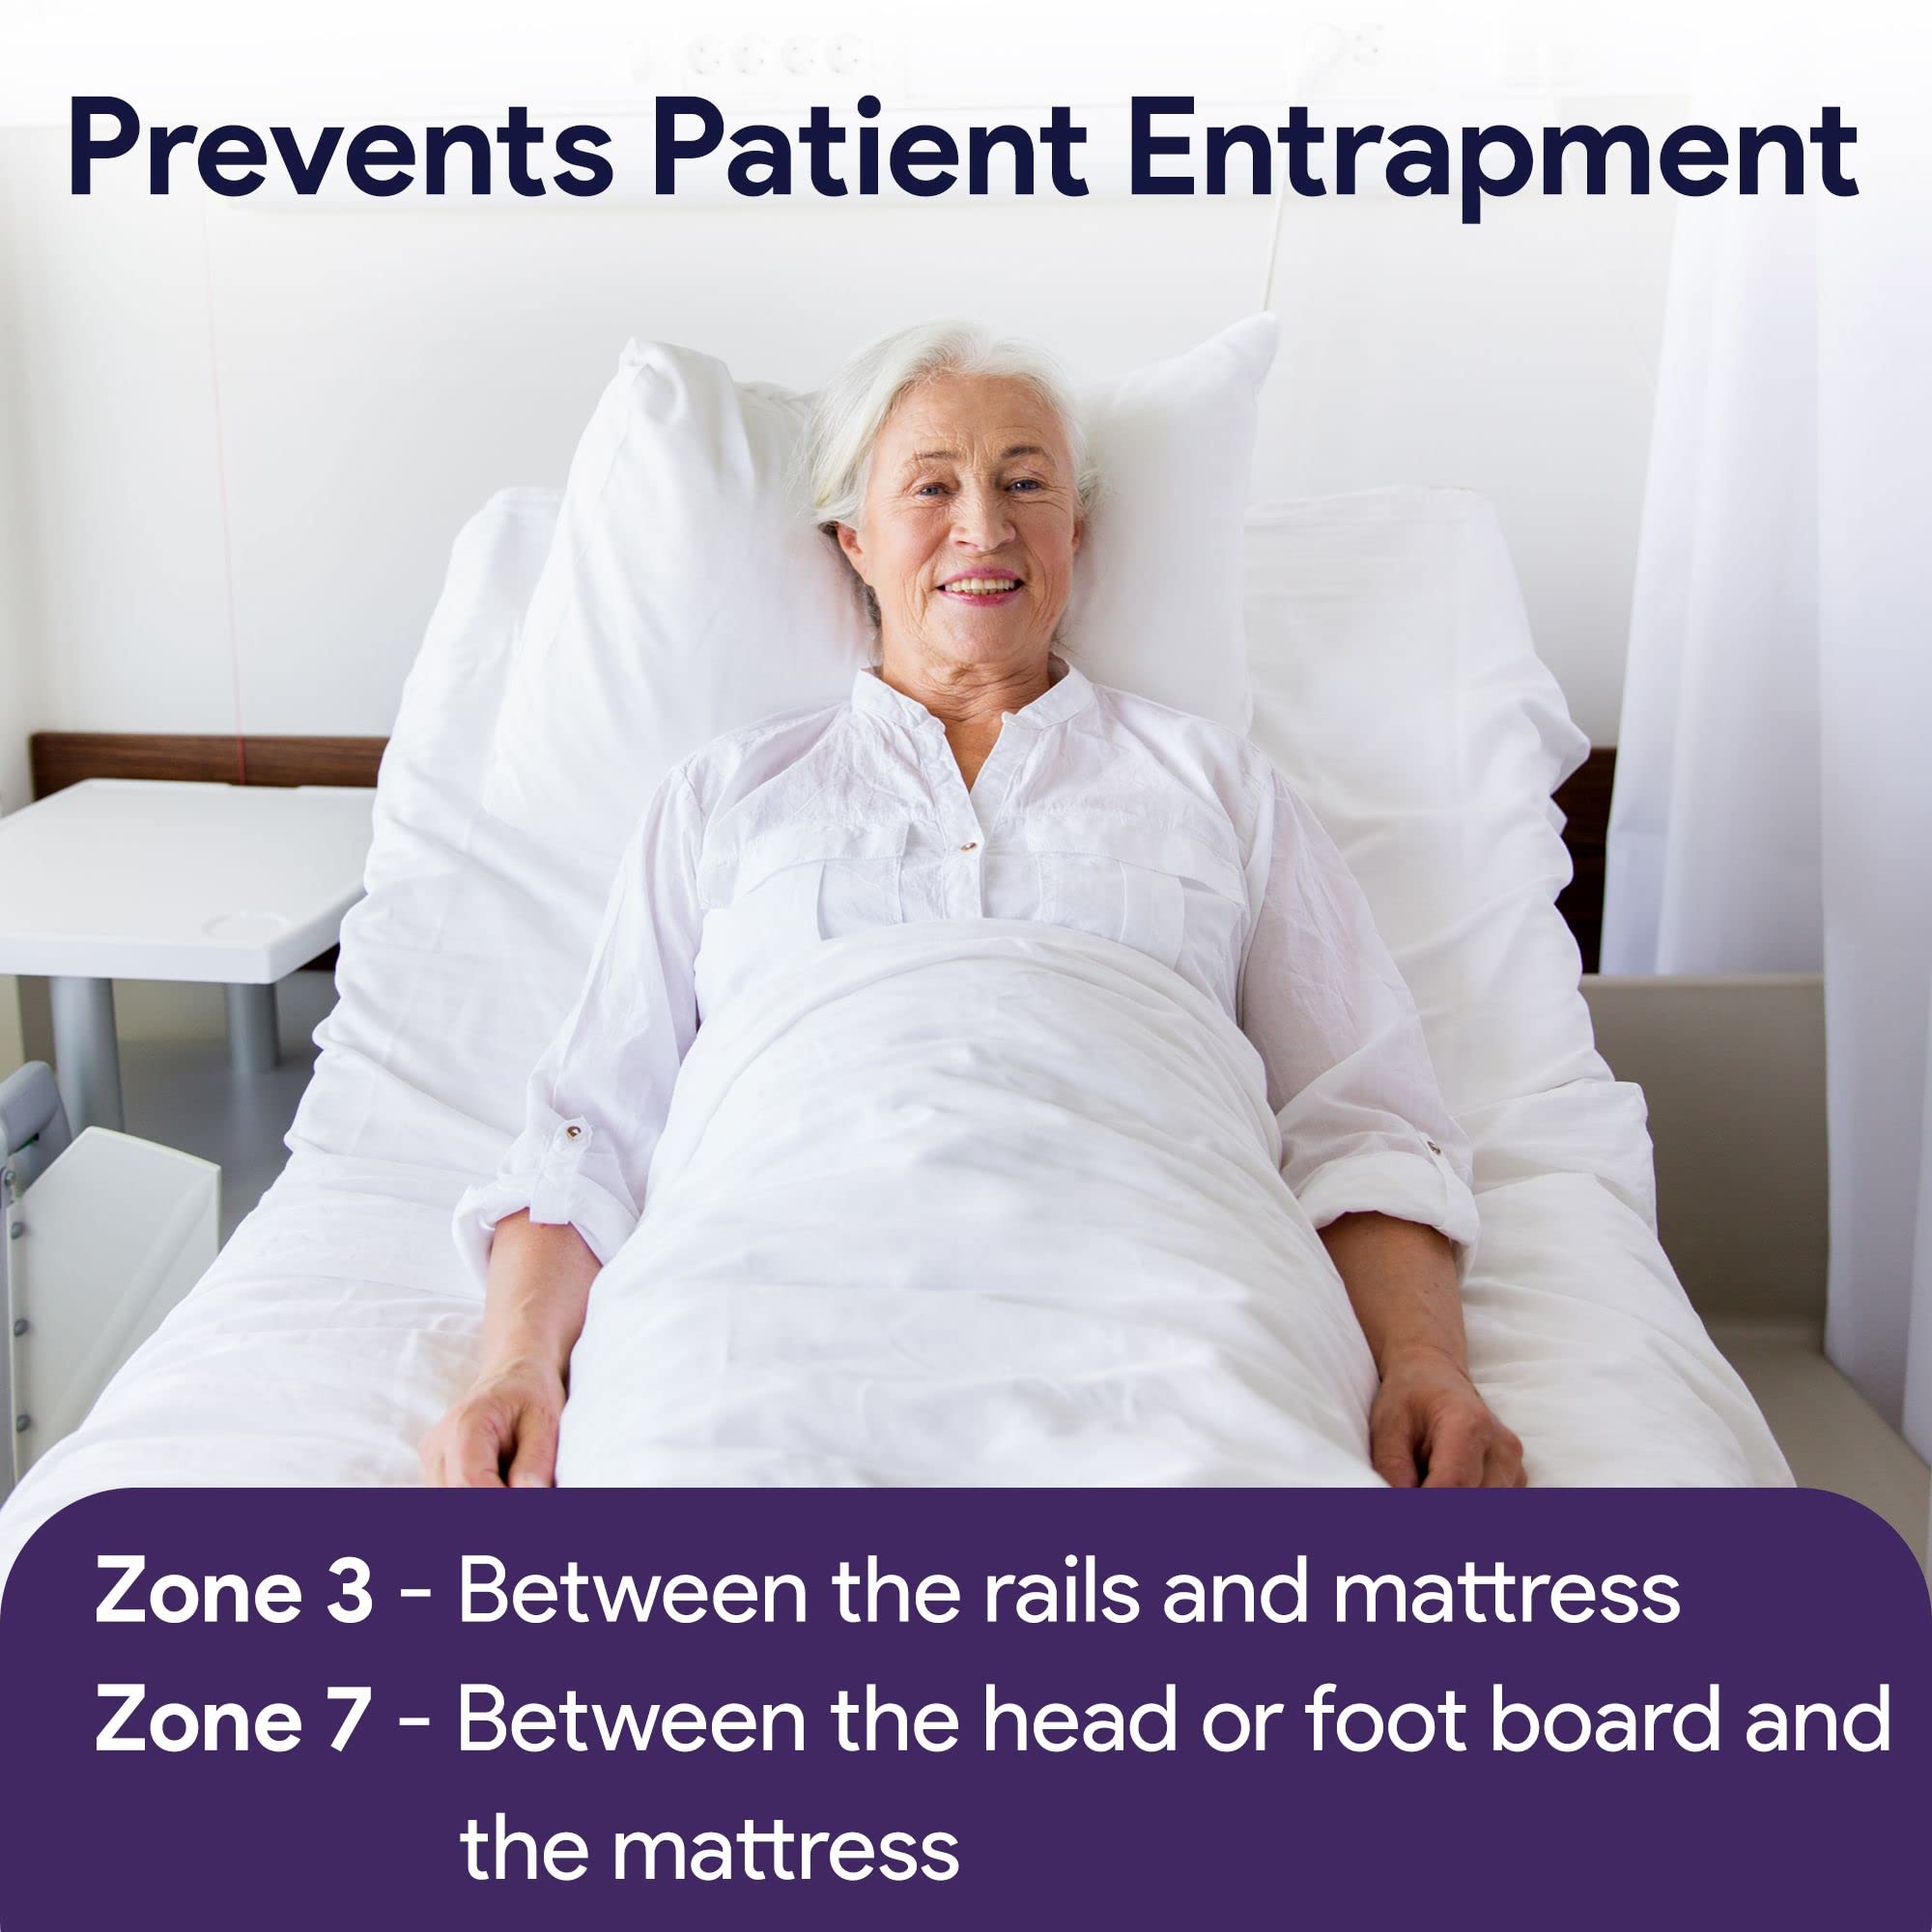 Hospital Bed Mattress Extender - Bed Extender for Bedroom and Hospital Beds - Adjustable Entrapment Prevention Safety - Prevents Zone 3 and 7 Entrapment  - Like New